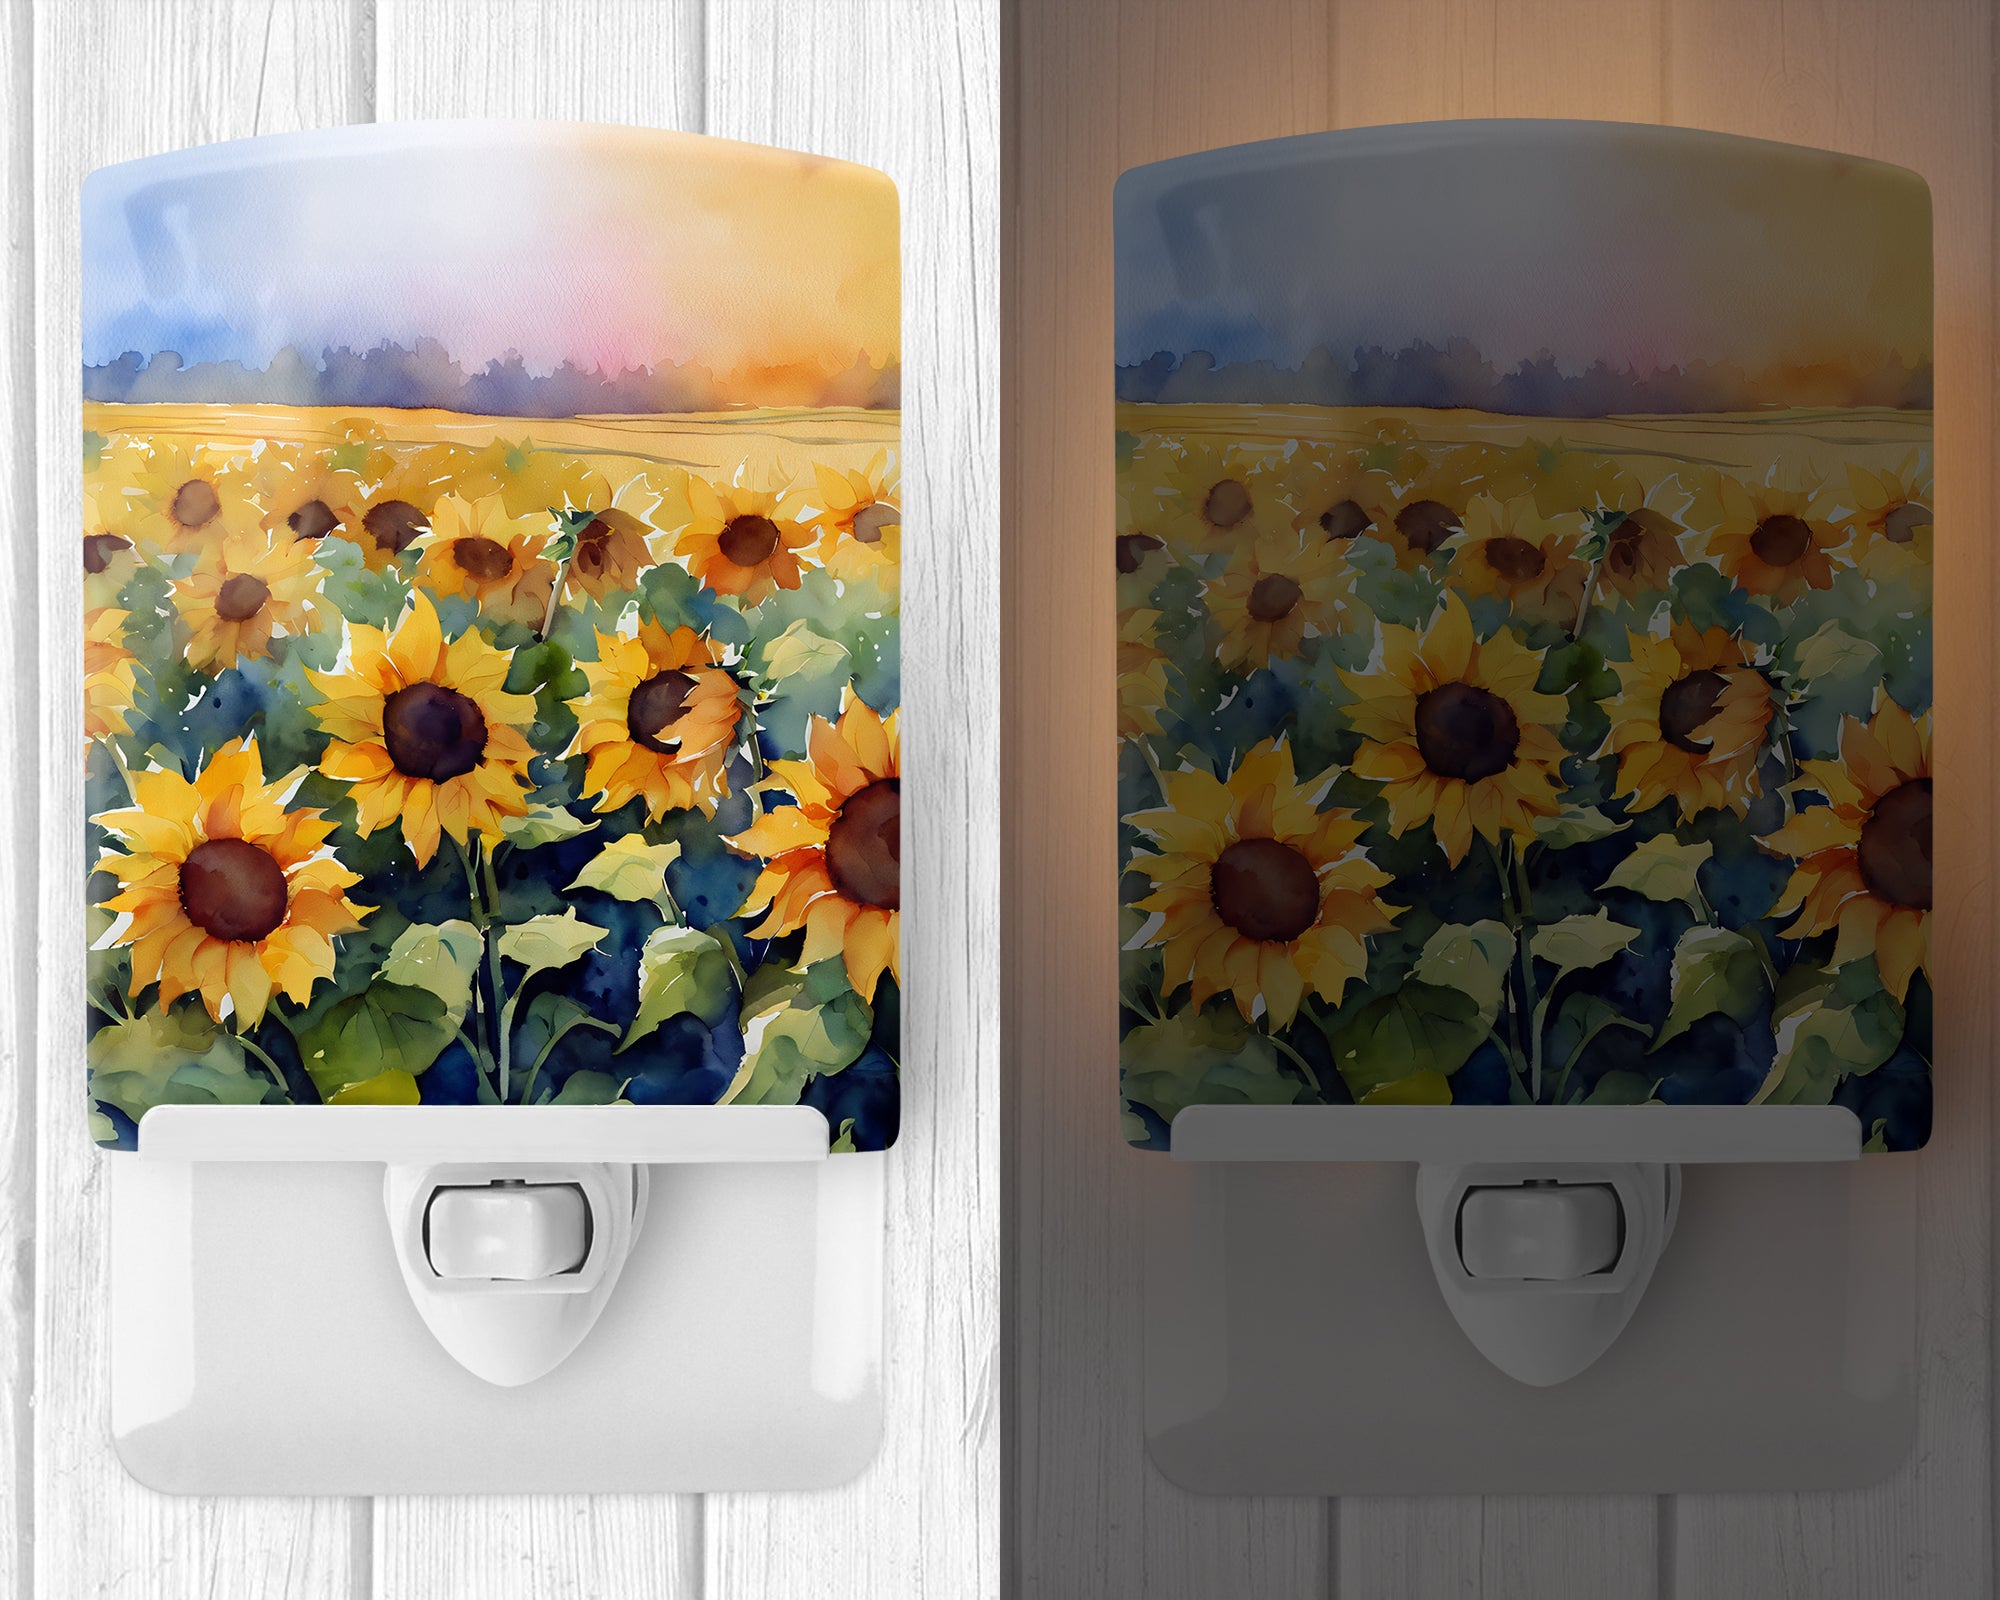 Buy this Sunflowers in Watercolor Ceramic Night Light